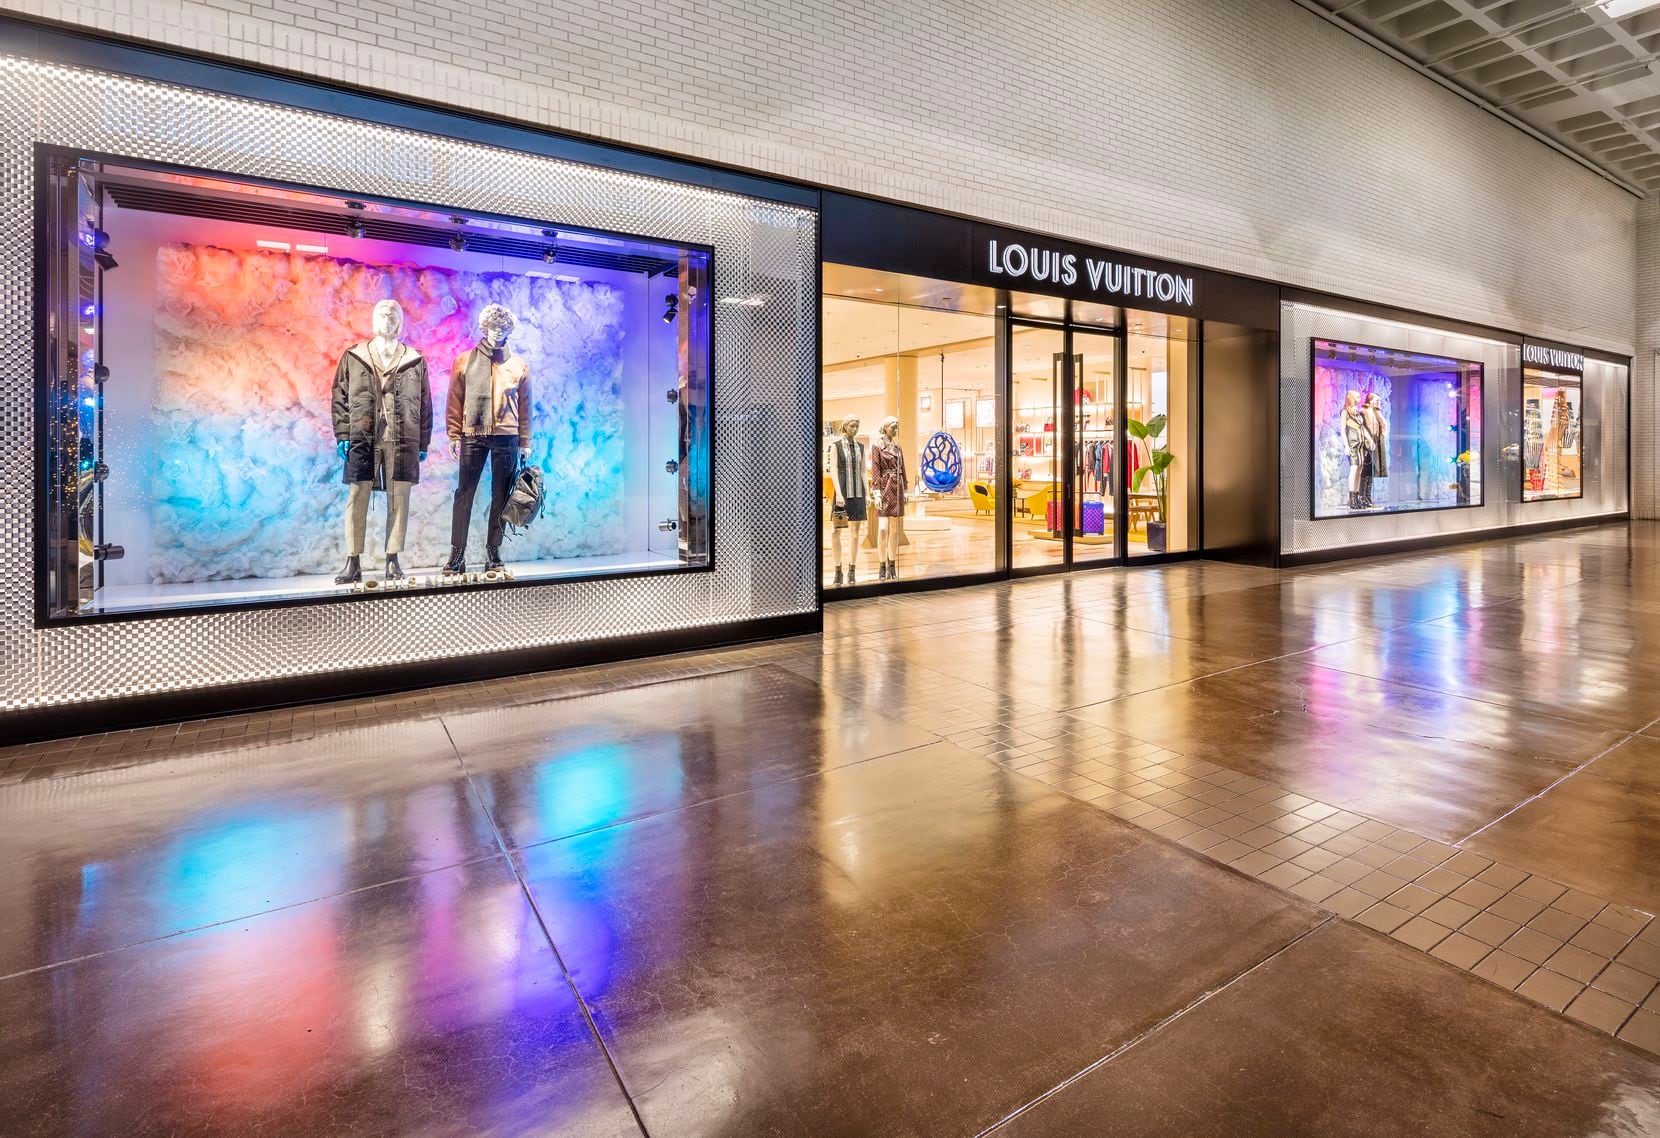 The reopened Louis Vuitton store is next to Nike and took in the two adjacent spaces vacated...